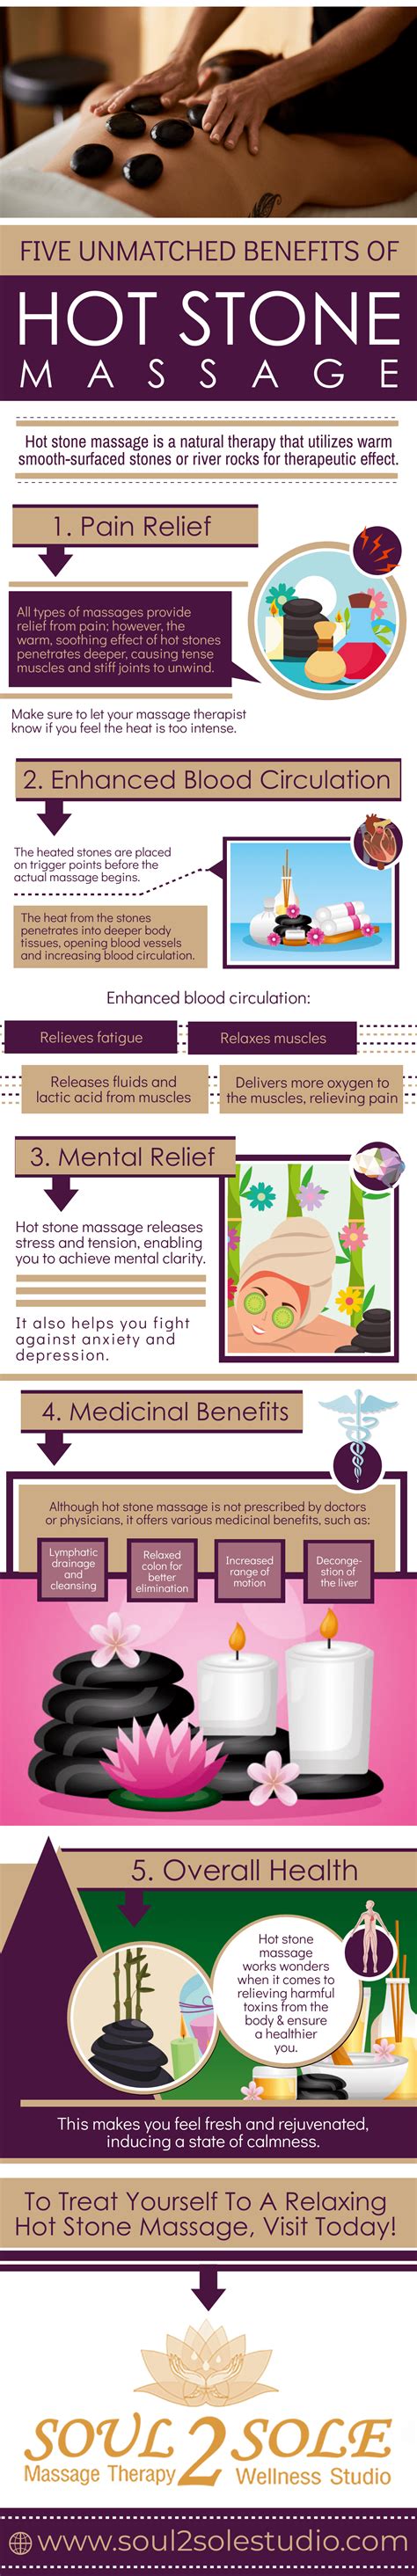 five unmatched benefits of hot stone massage infographic